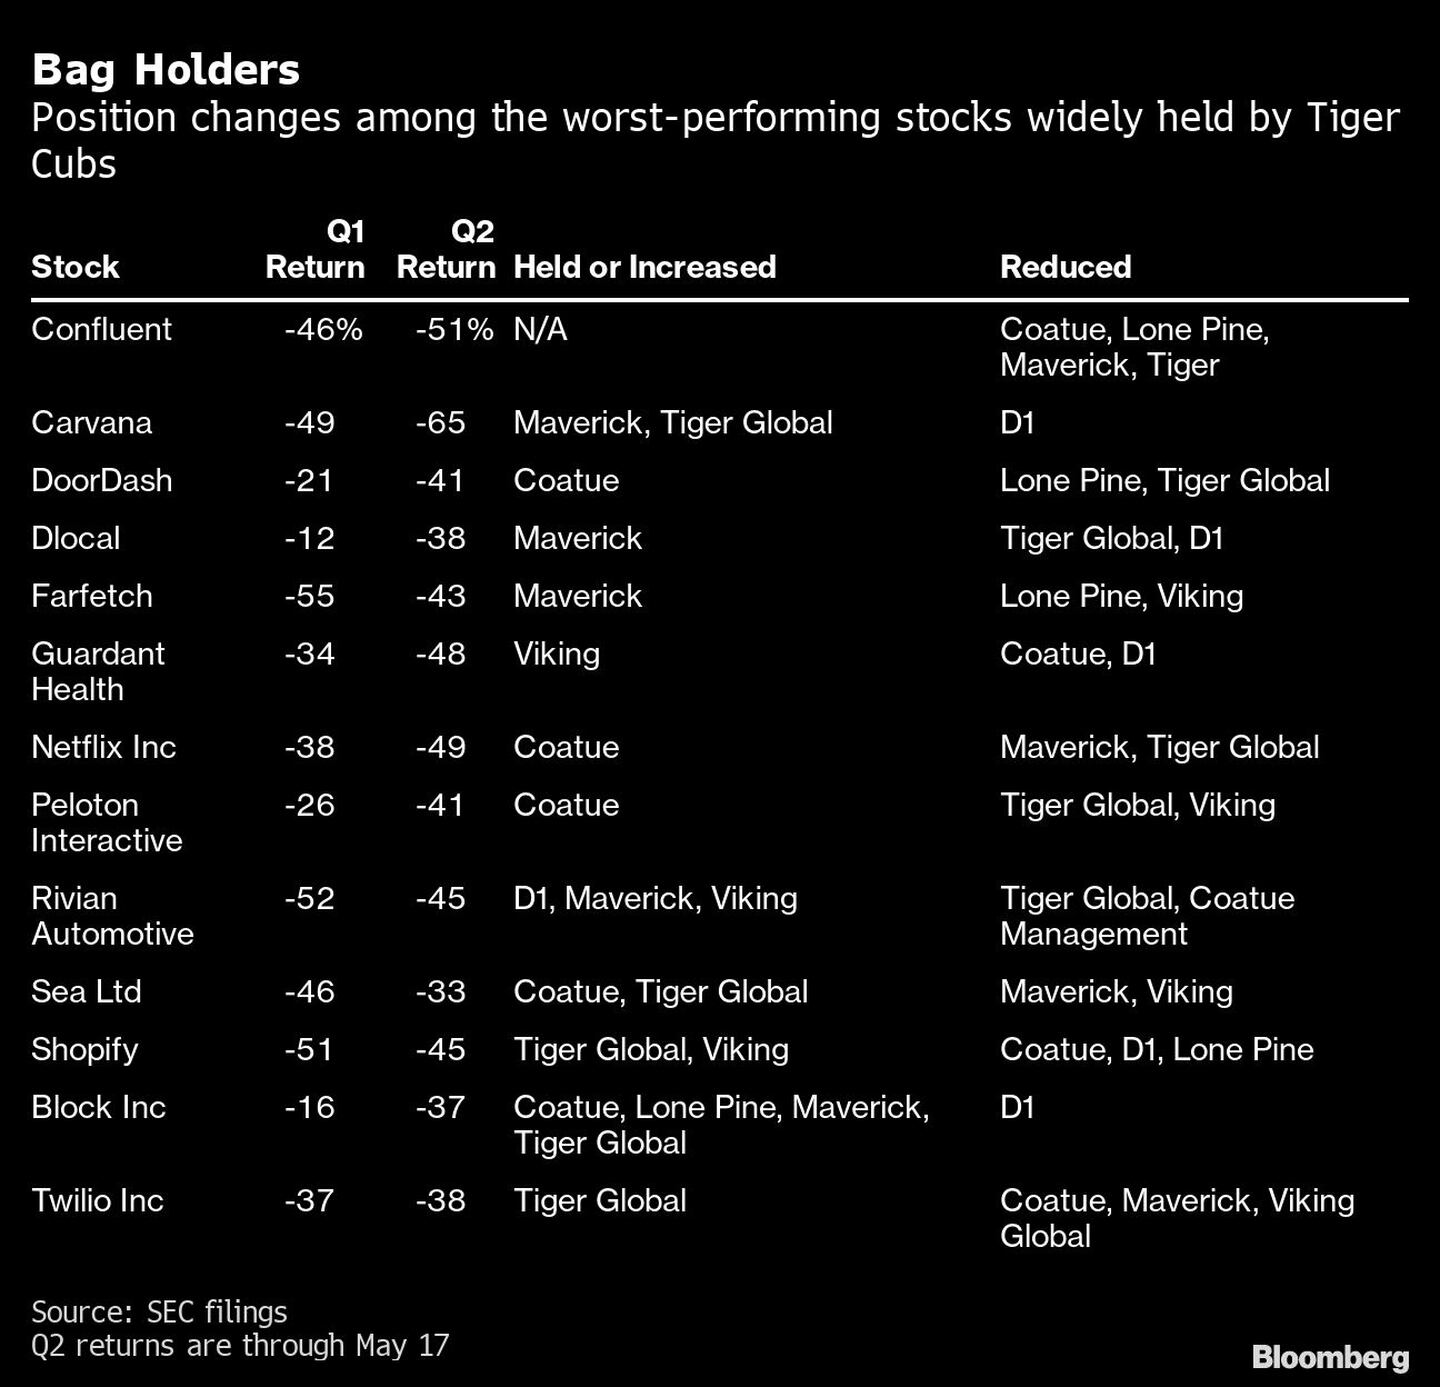 Bag Holders | Position changes among the worst-performing stocks widely held by Tiger Cubsdfd